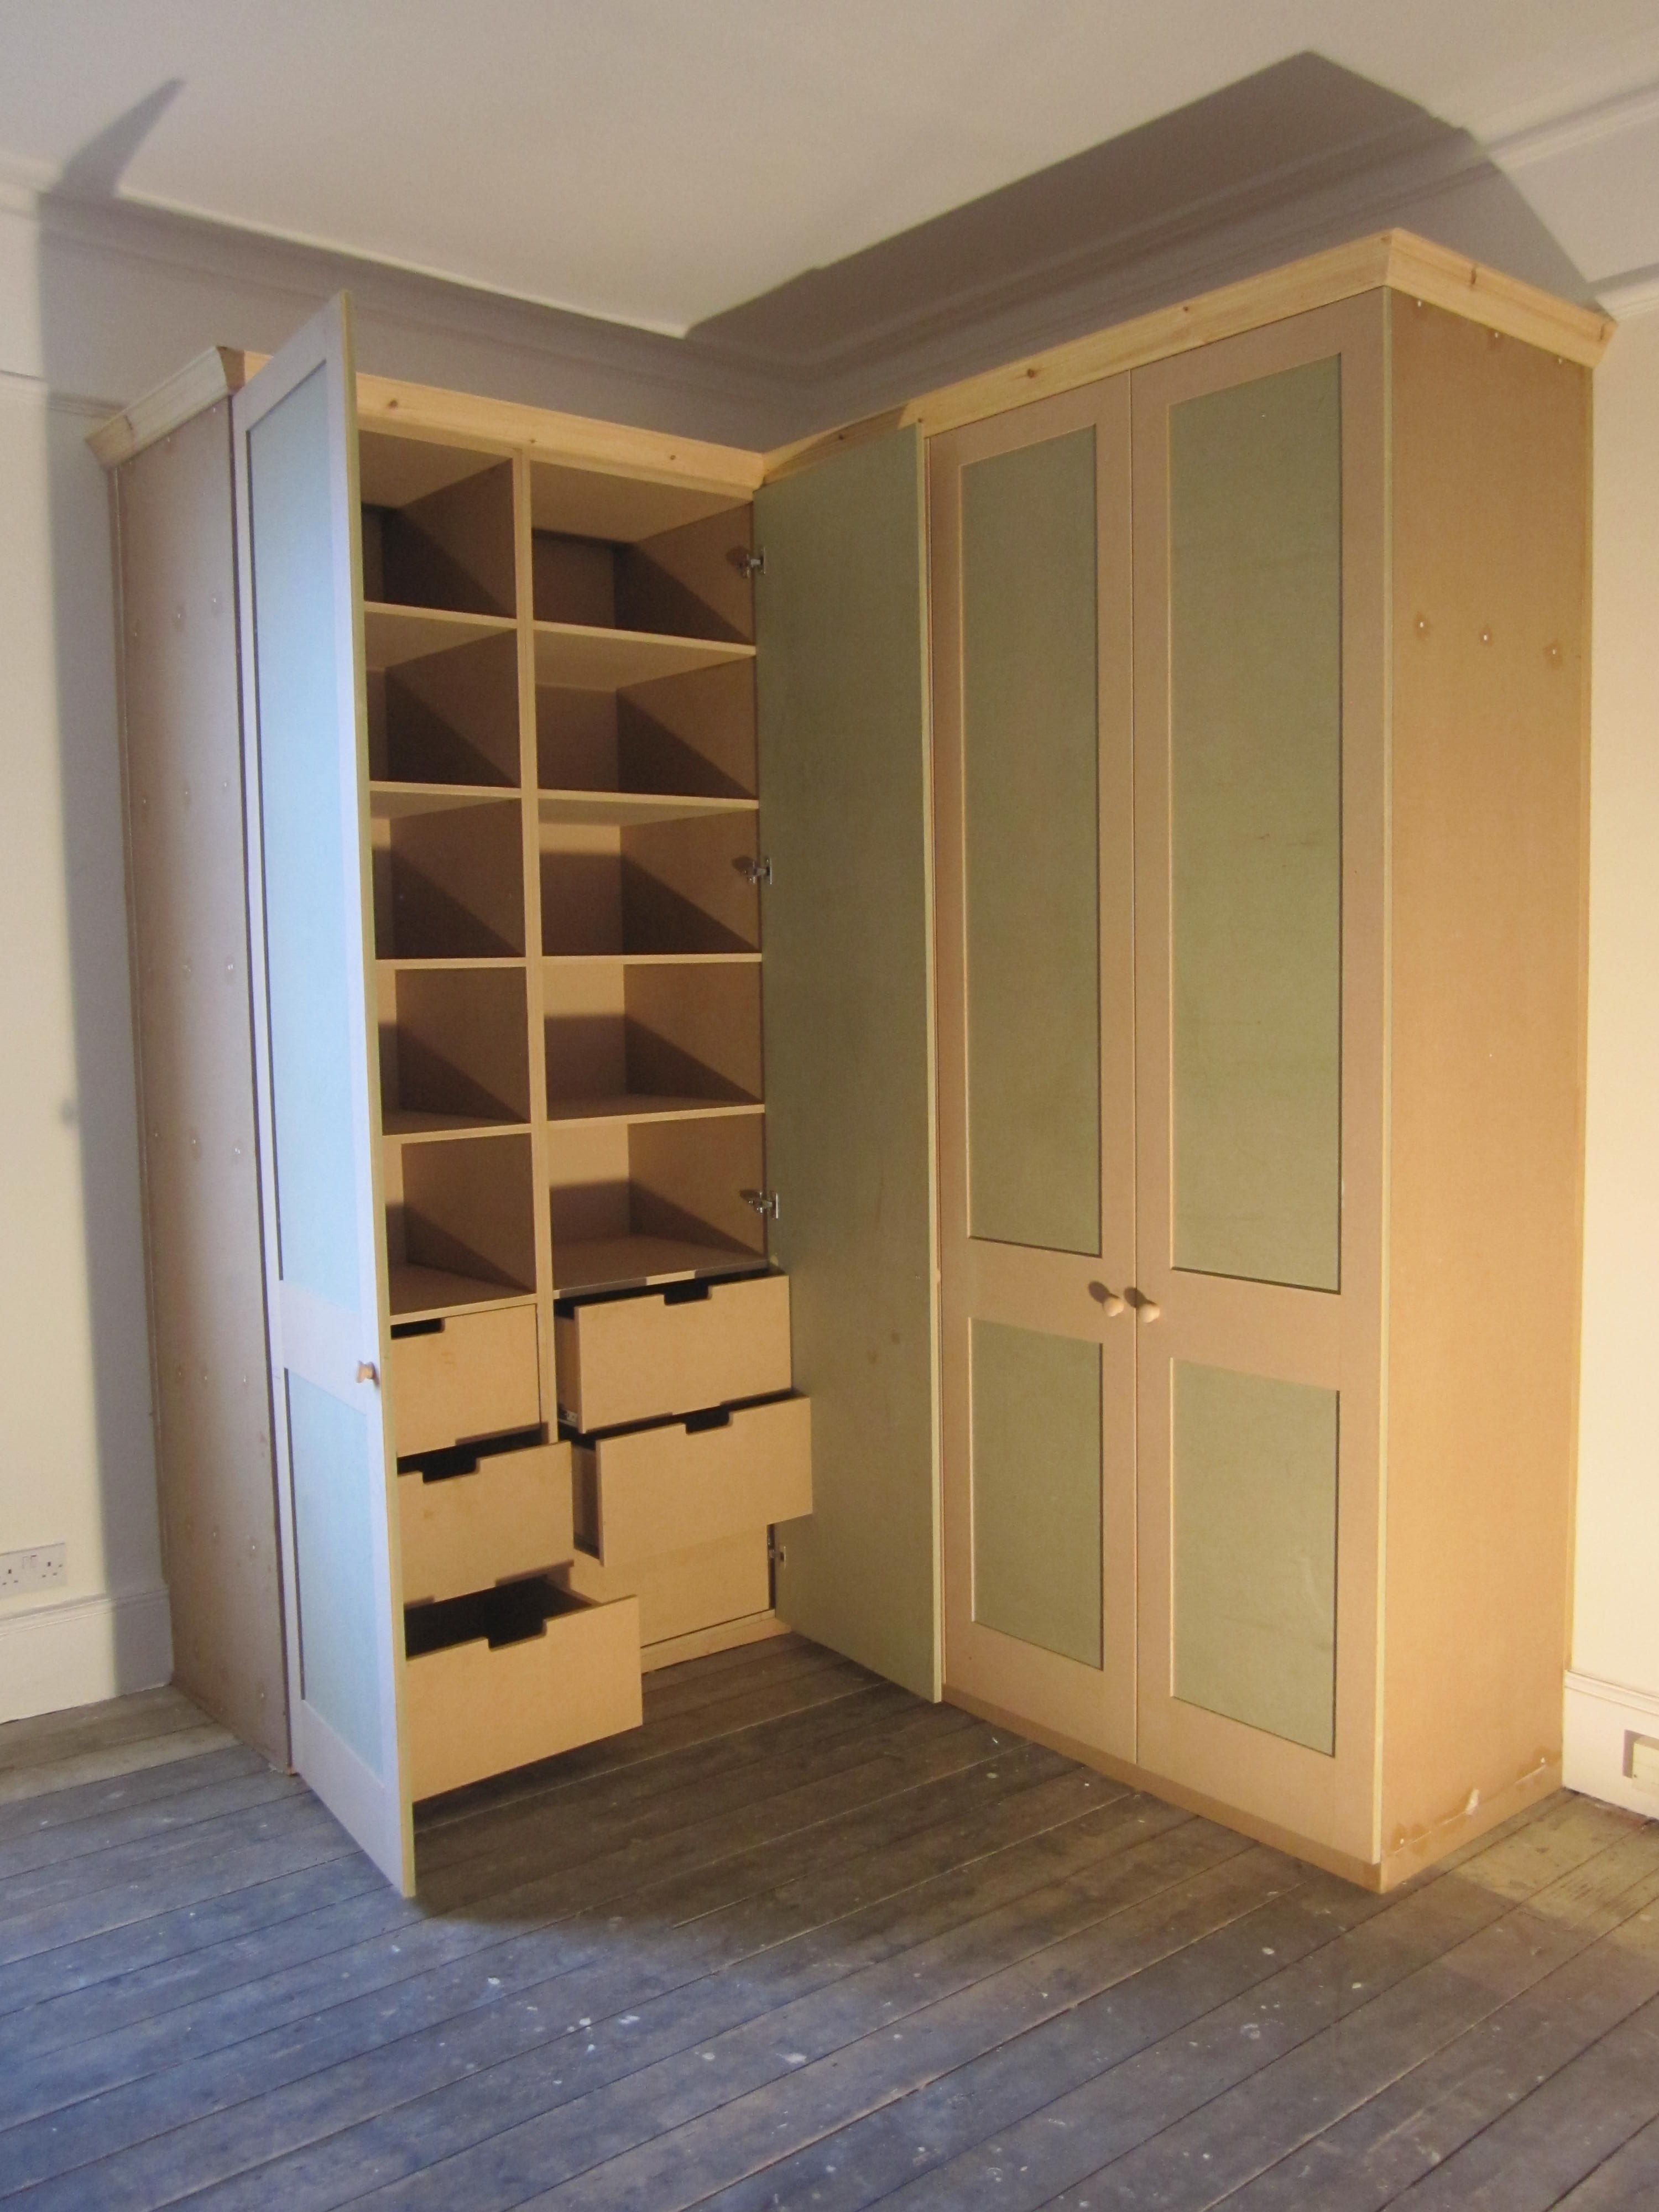 For Idea Of Drawer Shape Only Closets Pinterest Drawers And Within Wardrobes With Shelves (Photo 42 of 264)